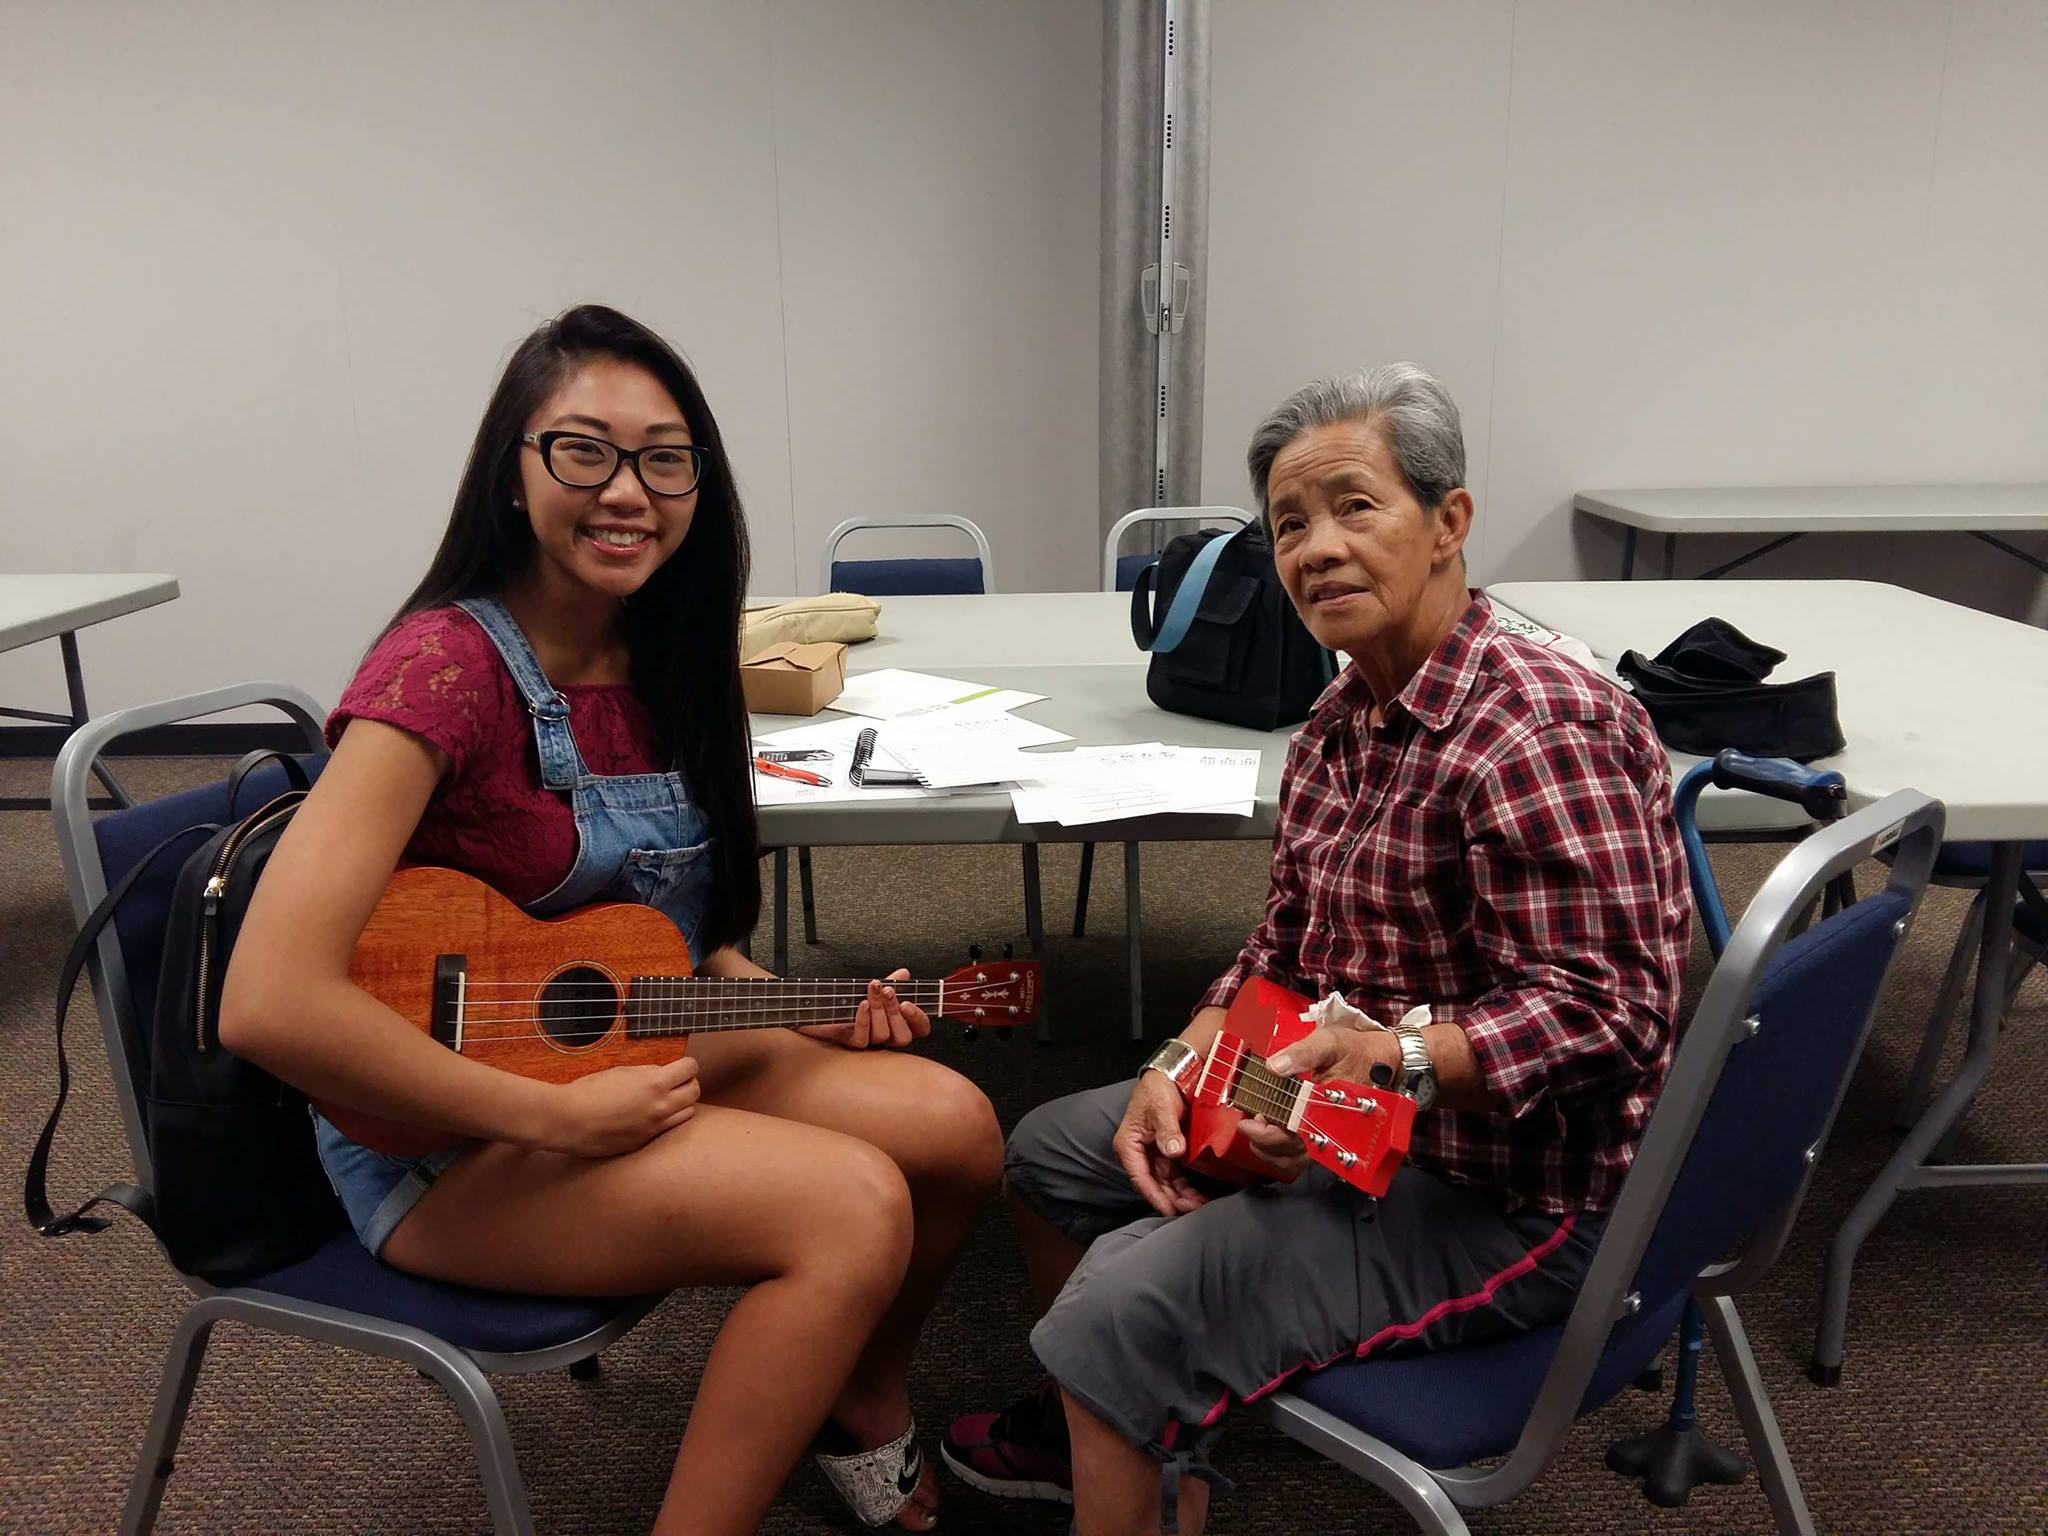 GivingTuesday Stories: Age Doesn't Matter - Lourdes & Chelsea